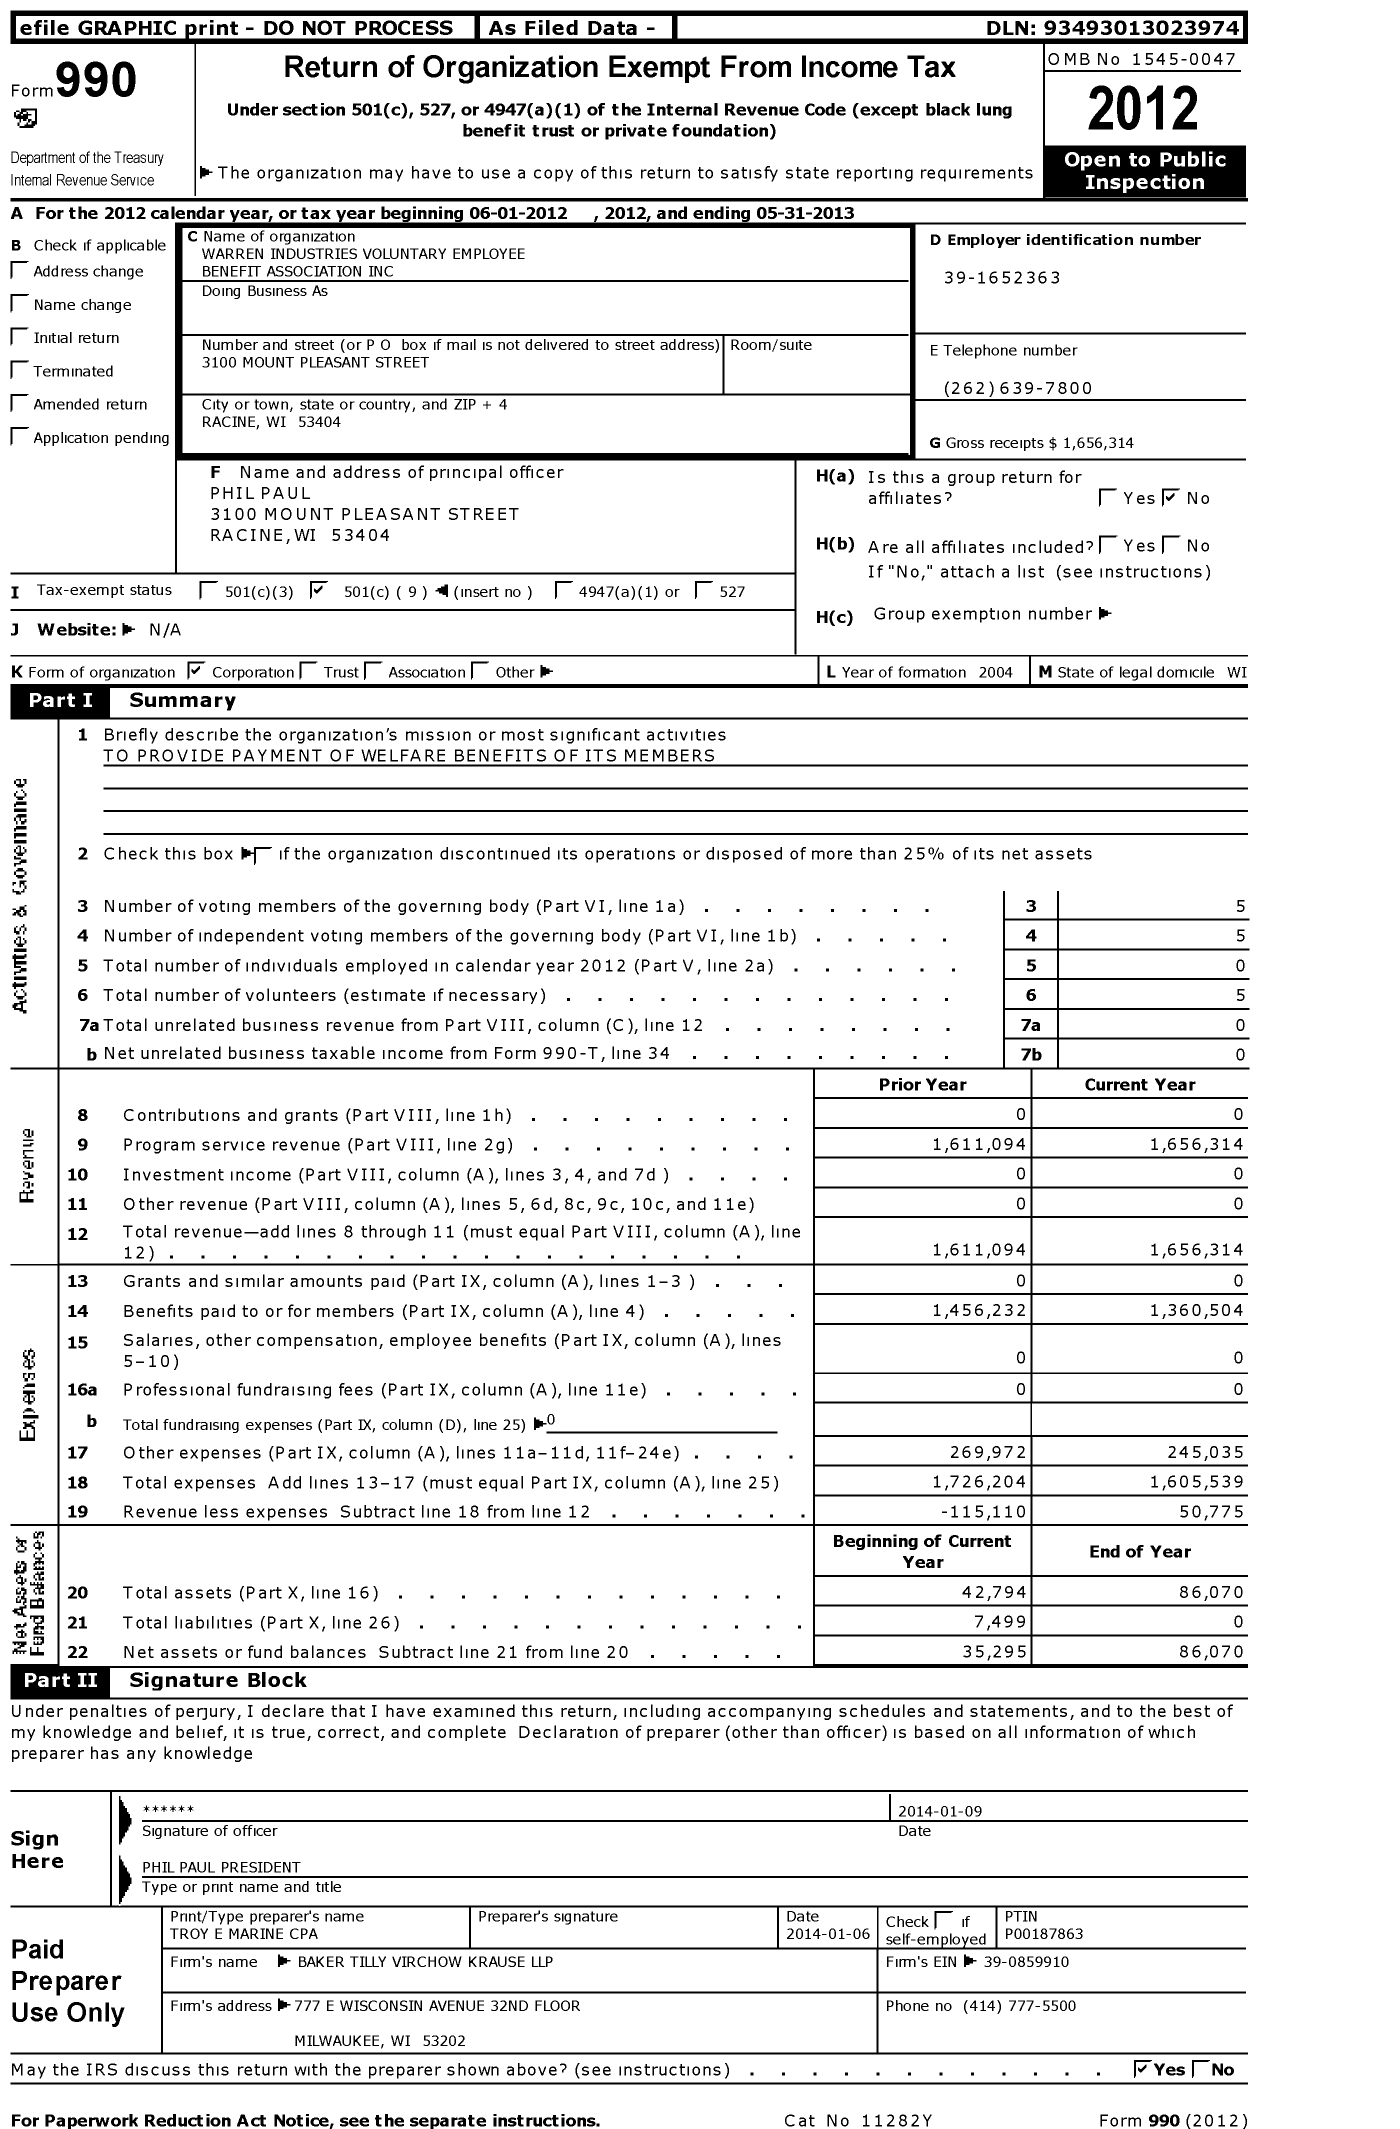 Image of first page of 2012 Form 990O for Warren Industries Voluntary Employee Benefit Association